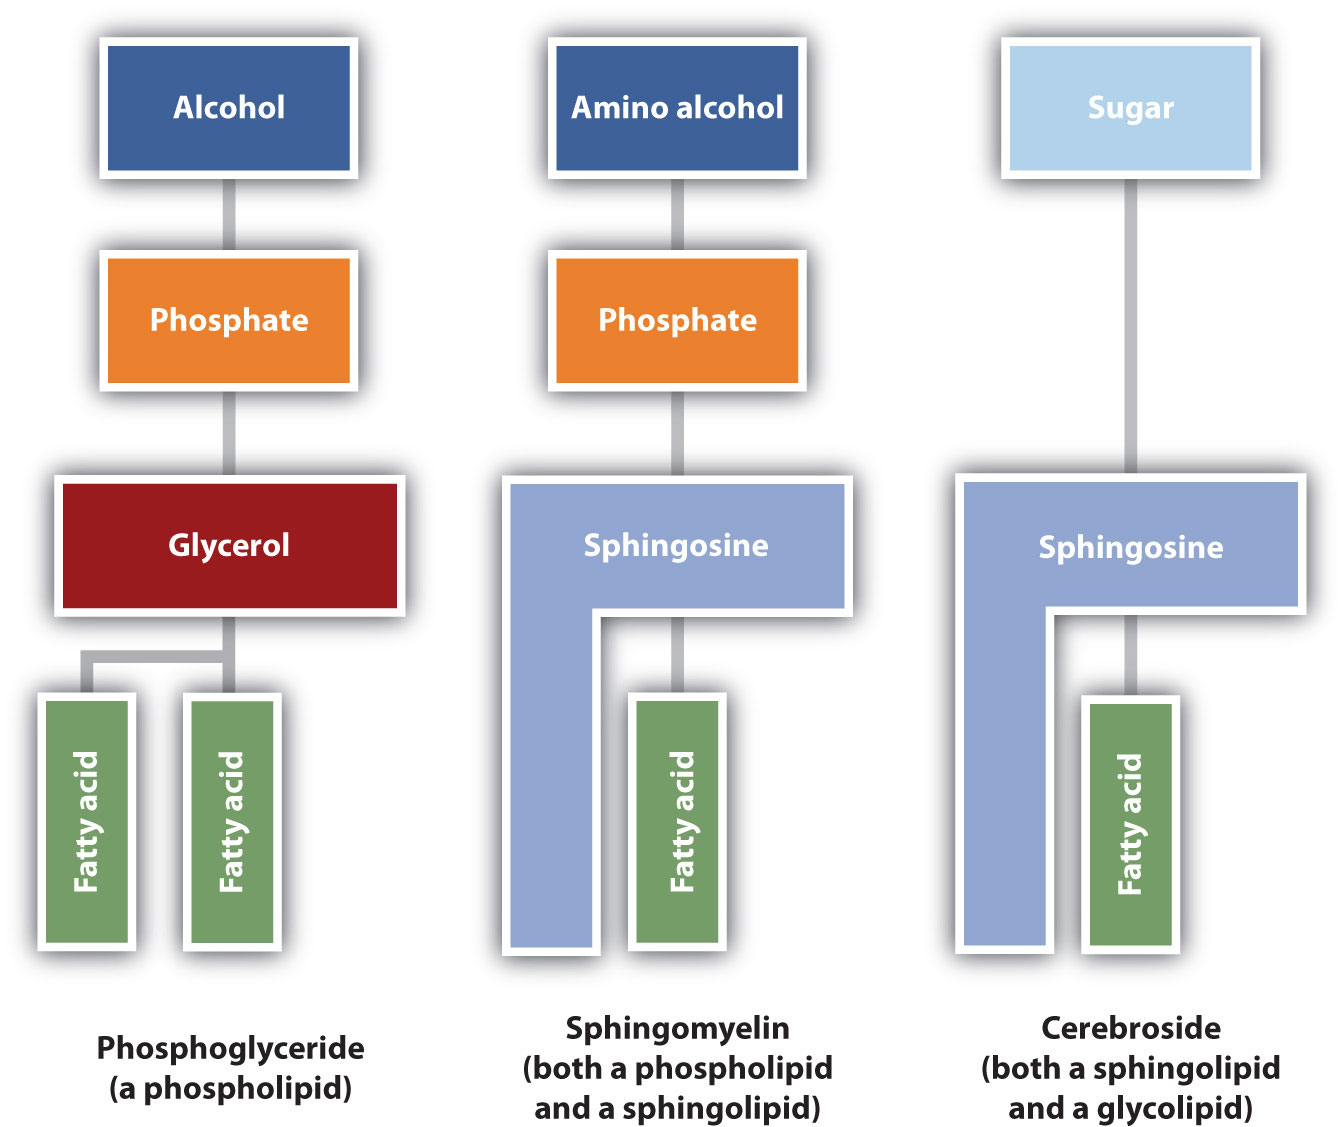 3 diagrams from left to right showing the components that make up membrane lipids: Phosphoglyceride, sphingomyelin and cerebroside.